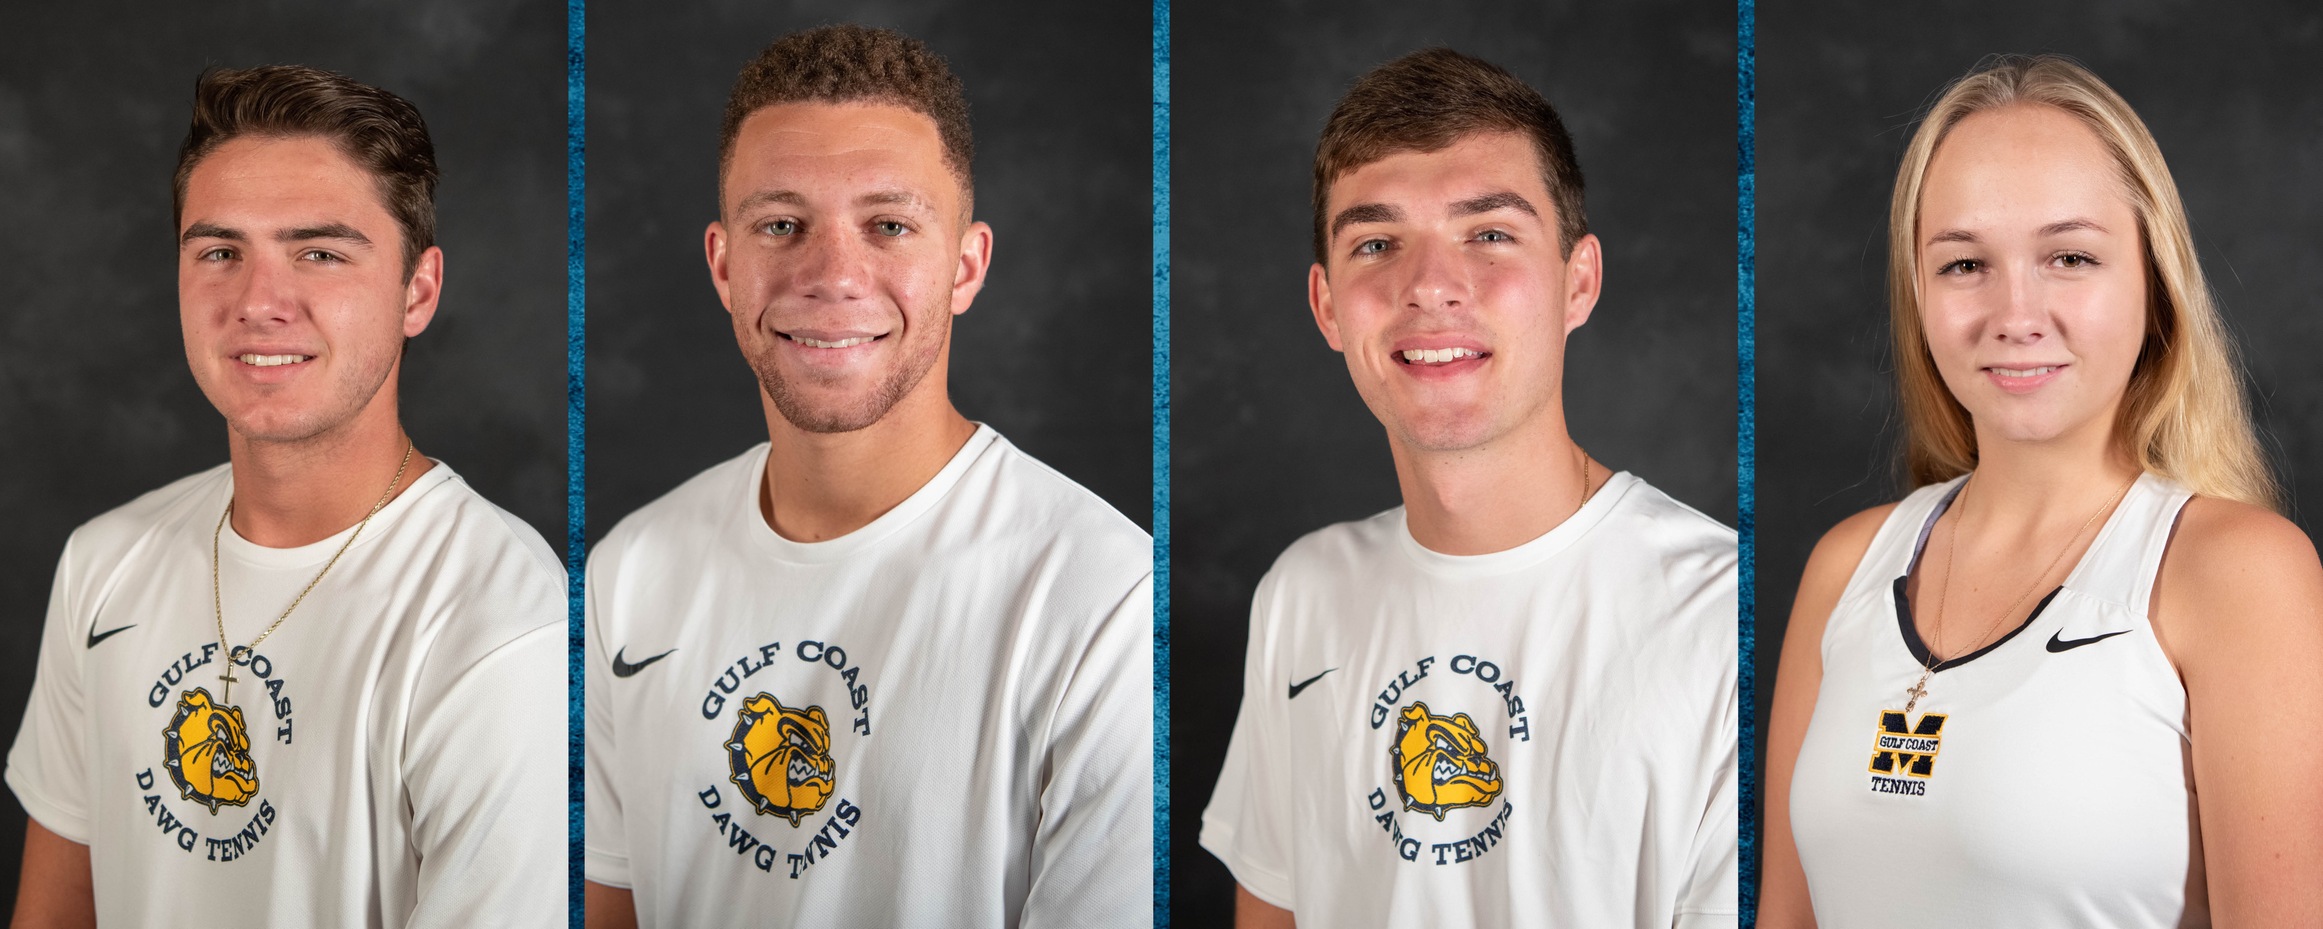 Chubb, Roth, Fontaine, Lopareva named MGCC Student-Athletes of the Week